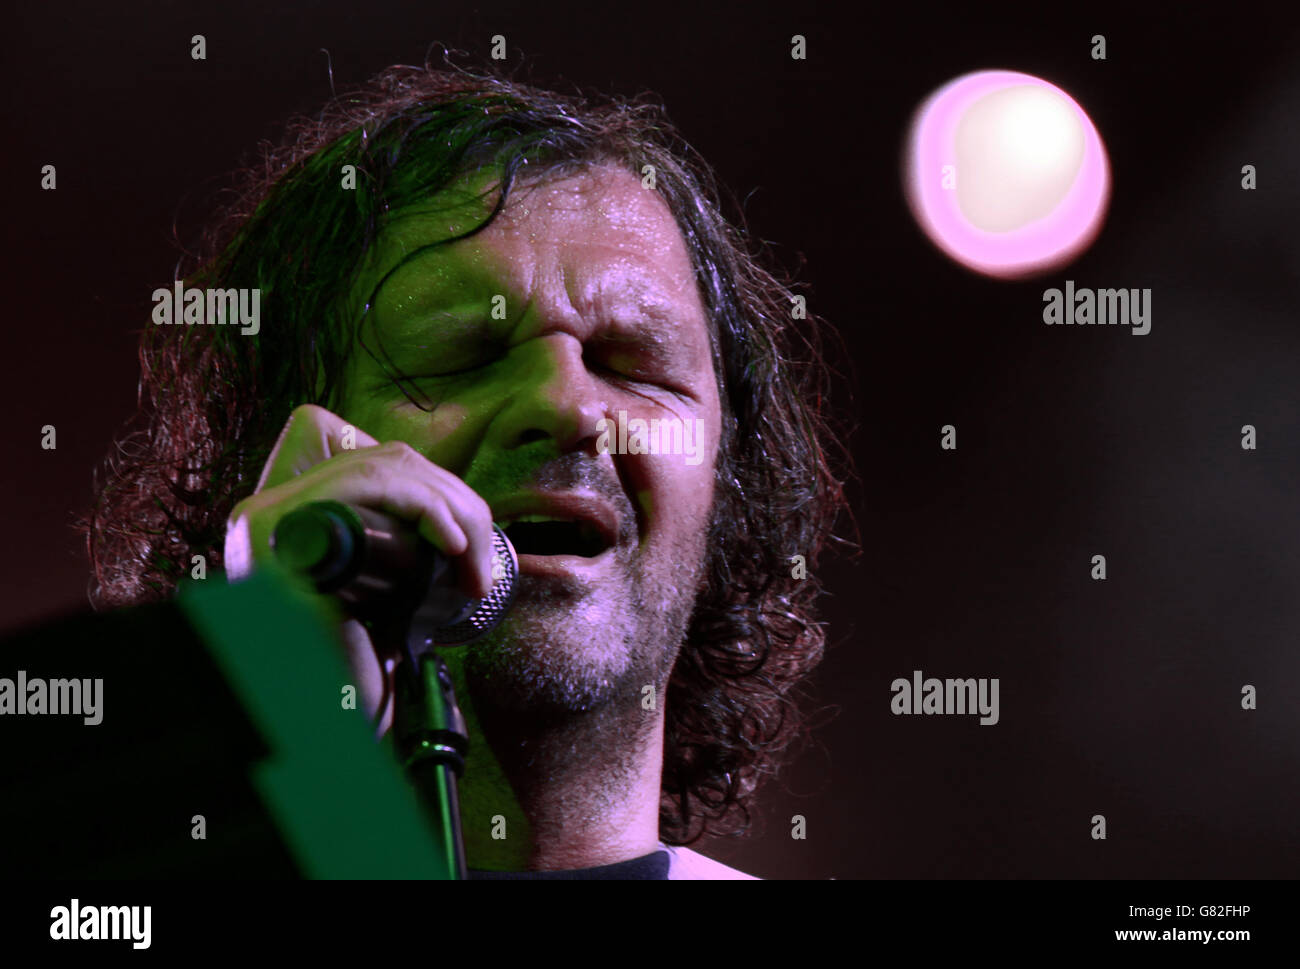 Emir Kusturica and his band The no smoking orchestra perform on stage at Nice Jazz Festival on July 11, 2012 in Nice, France. Stock Photo